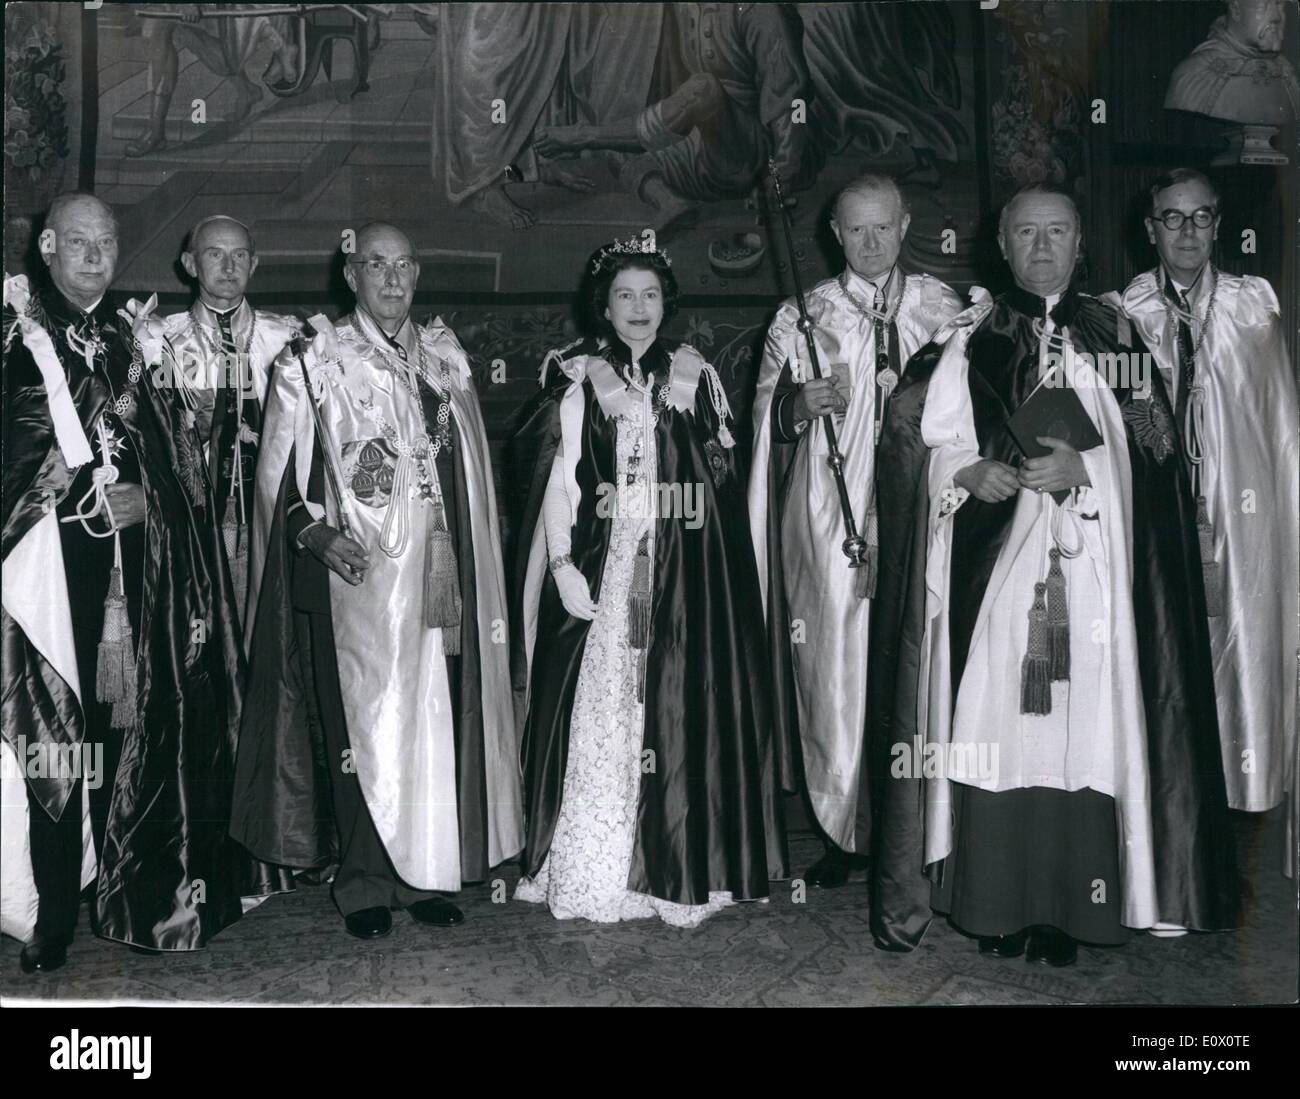 Oct. 10, 1964 - The Queen attends the 900th anniversary of the order of the Bath: To mark the 900th anniversary of the creation Stock Photo